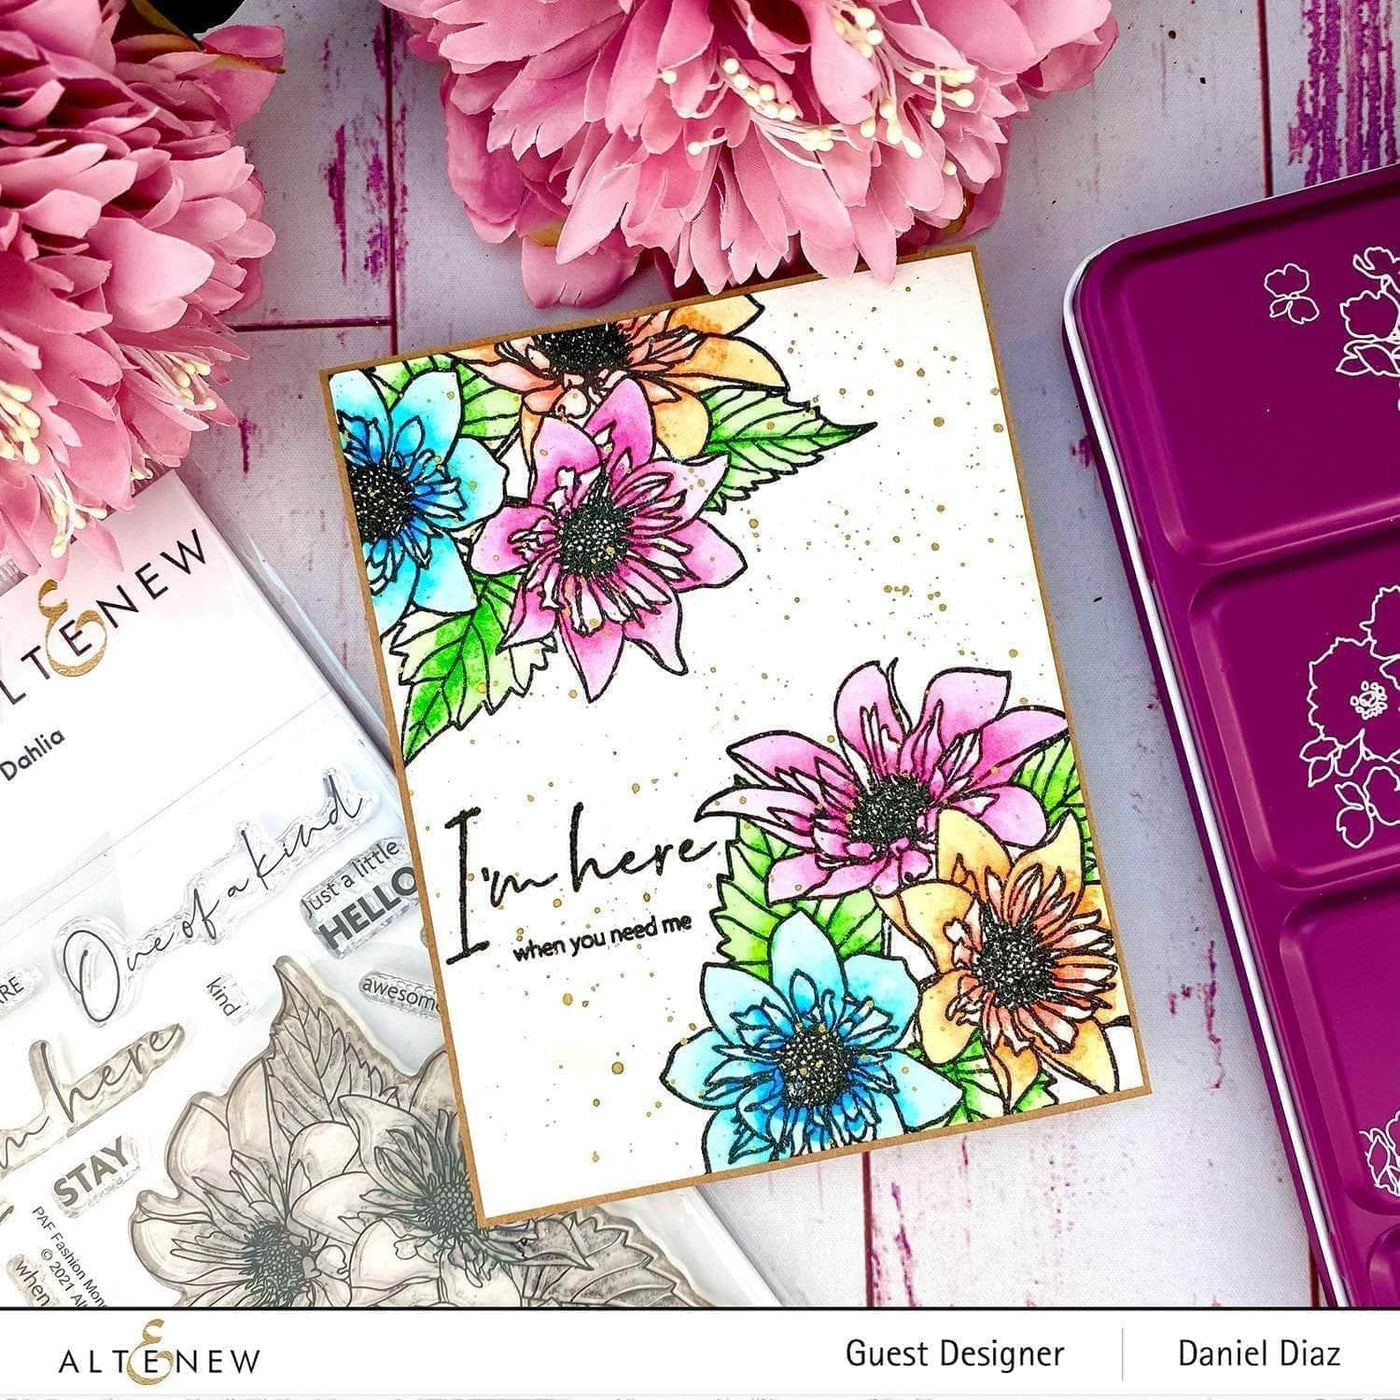 Clear Stamps Paint-A-Flower: Fashion Monger Dahlia Outline Stamp Set